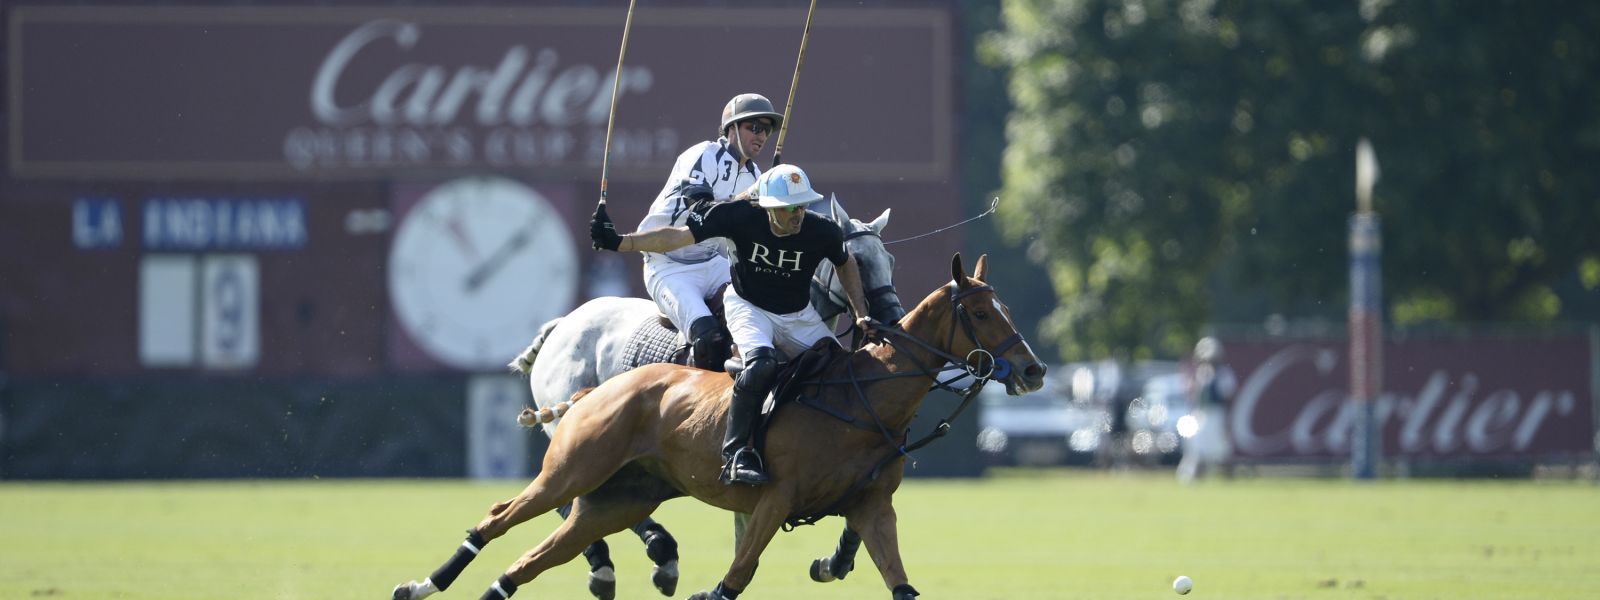 The 7 Top Polo Tournaments in The World Cartier Queen's Cup